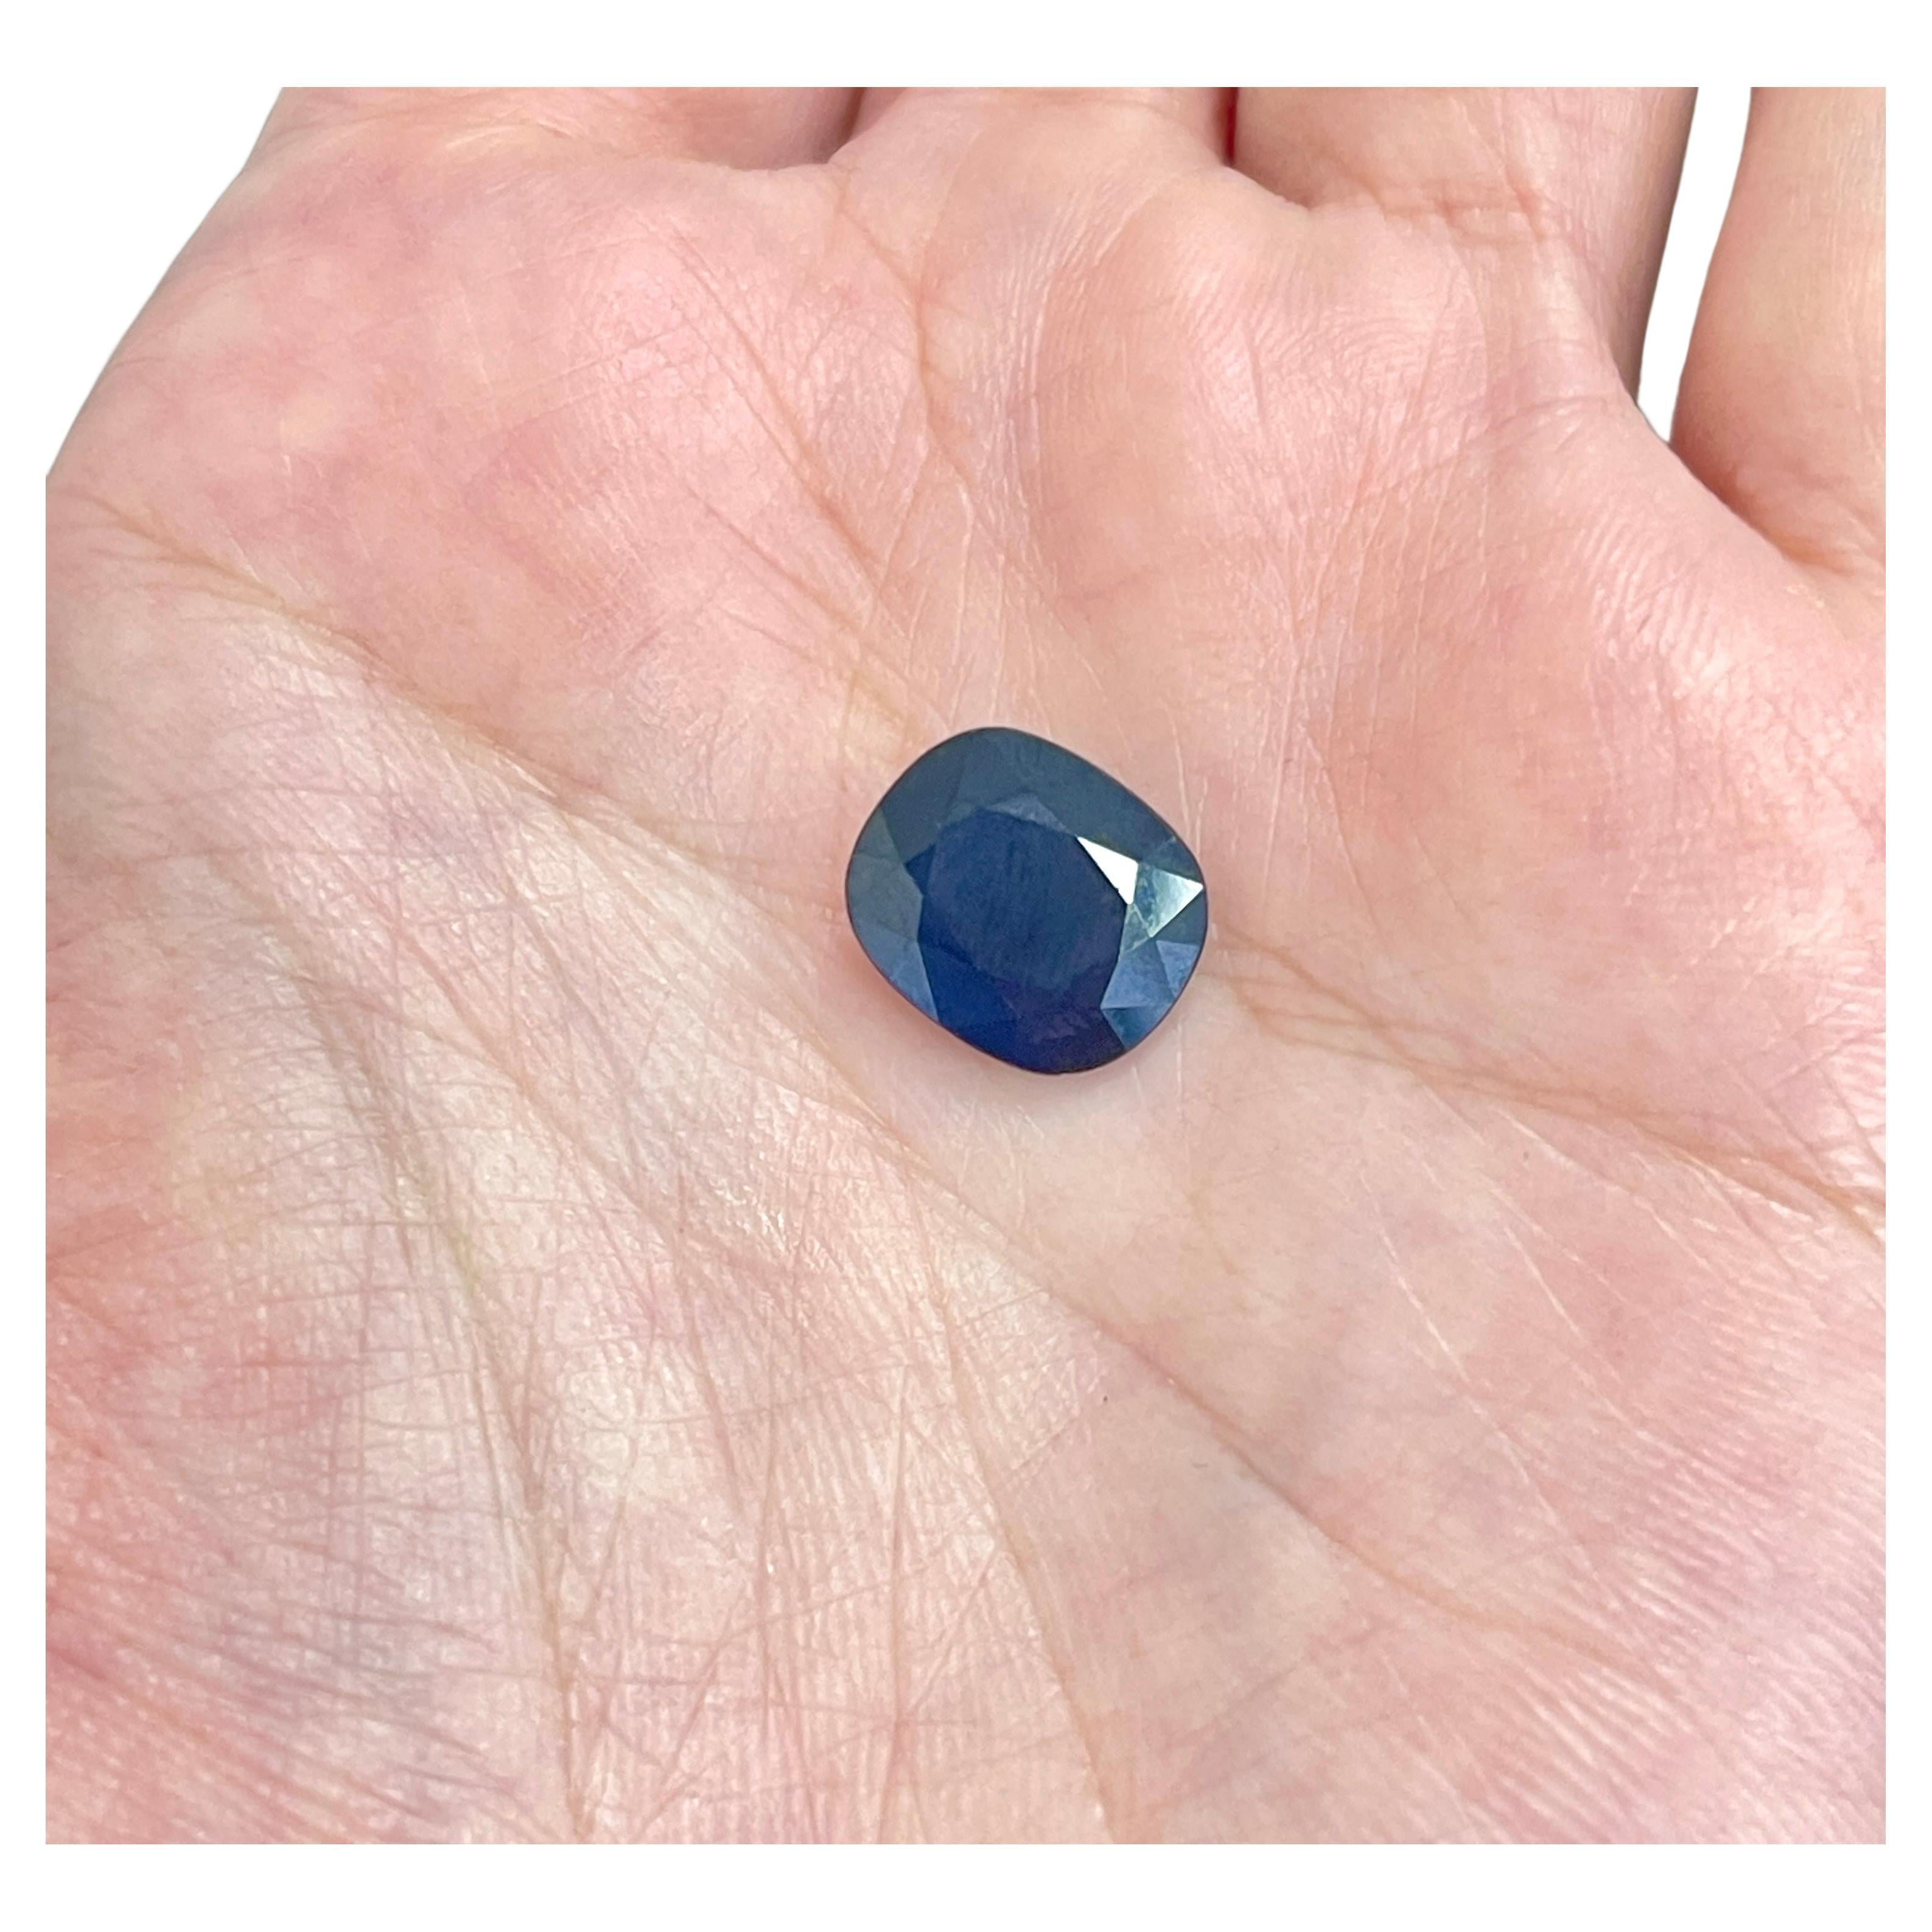 5.19 Carats Natural Heat Vivid Blue Radiant Cut Sapphire
9.8mm x 11.5mm

*Free shipping within the U.S.*